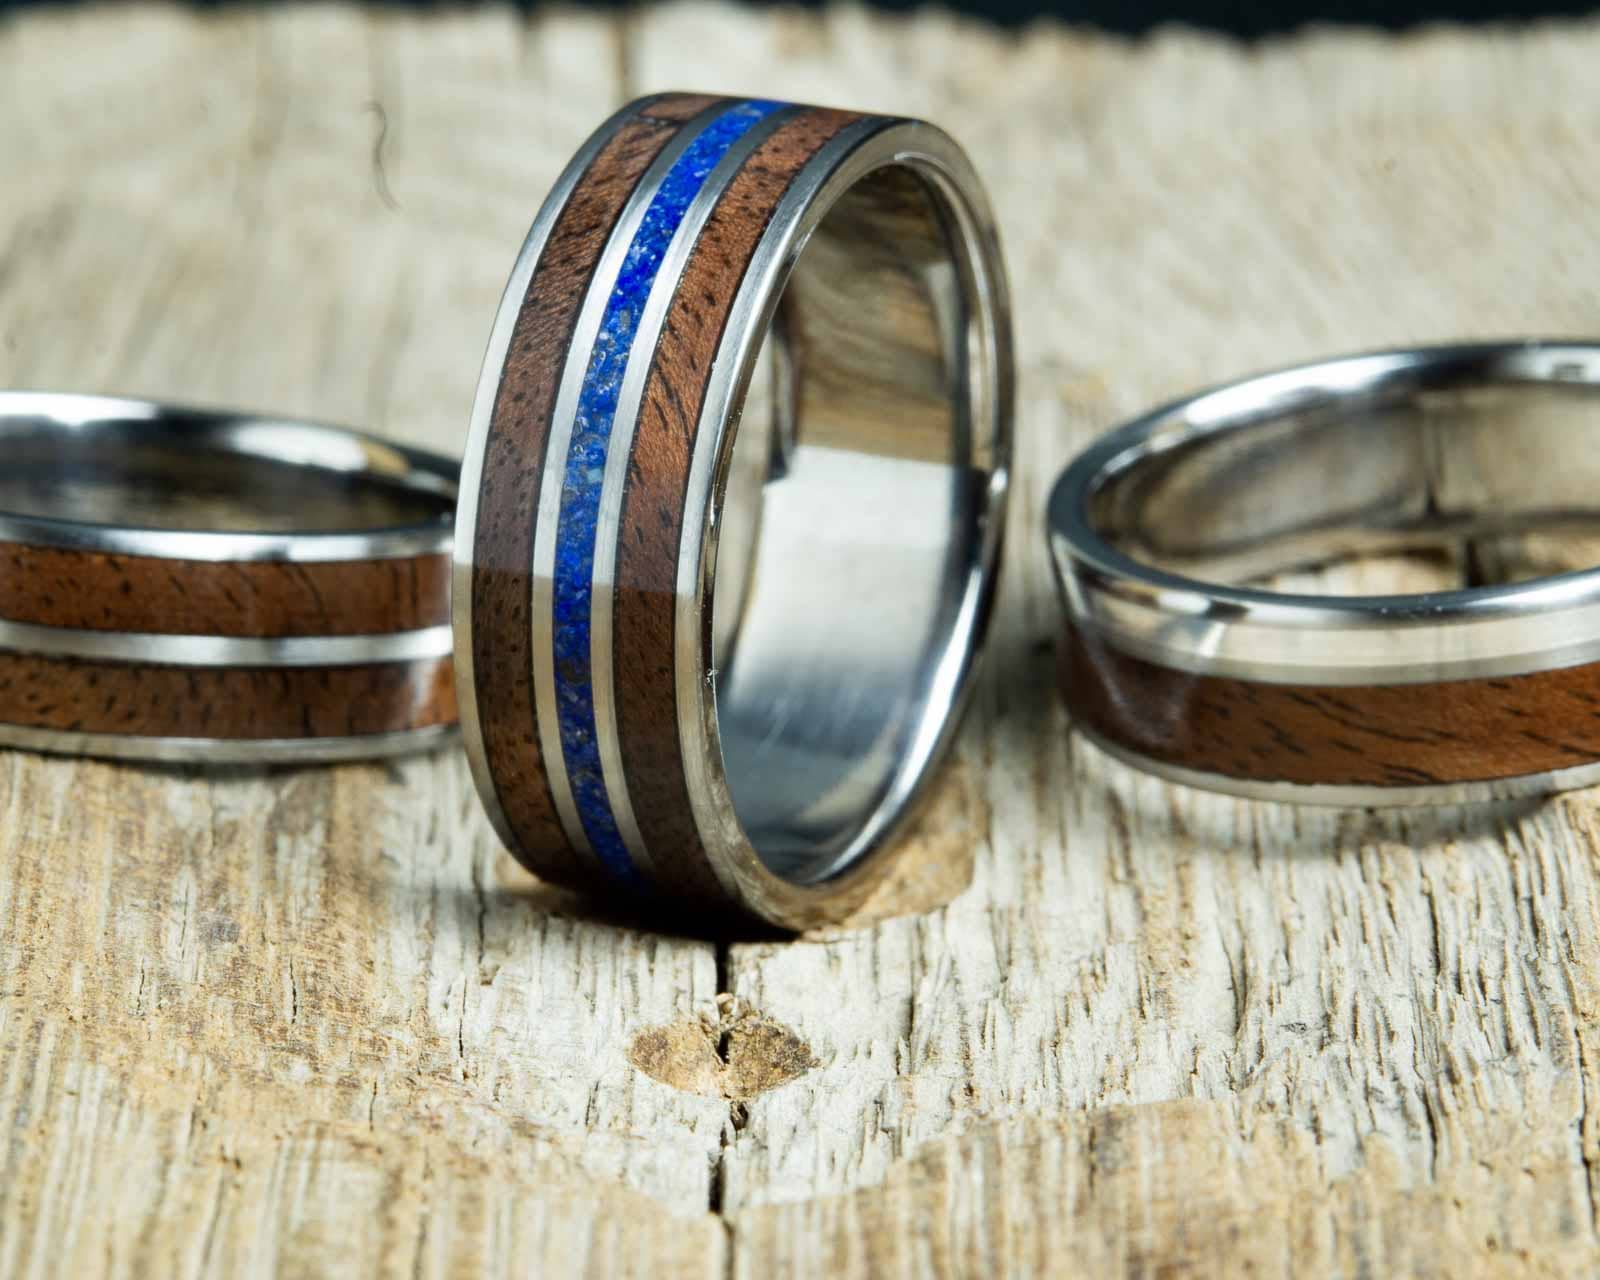 Wooden rings for men made of Walnut and Miami Sand Inlay, Wood